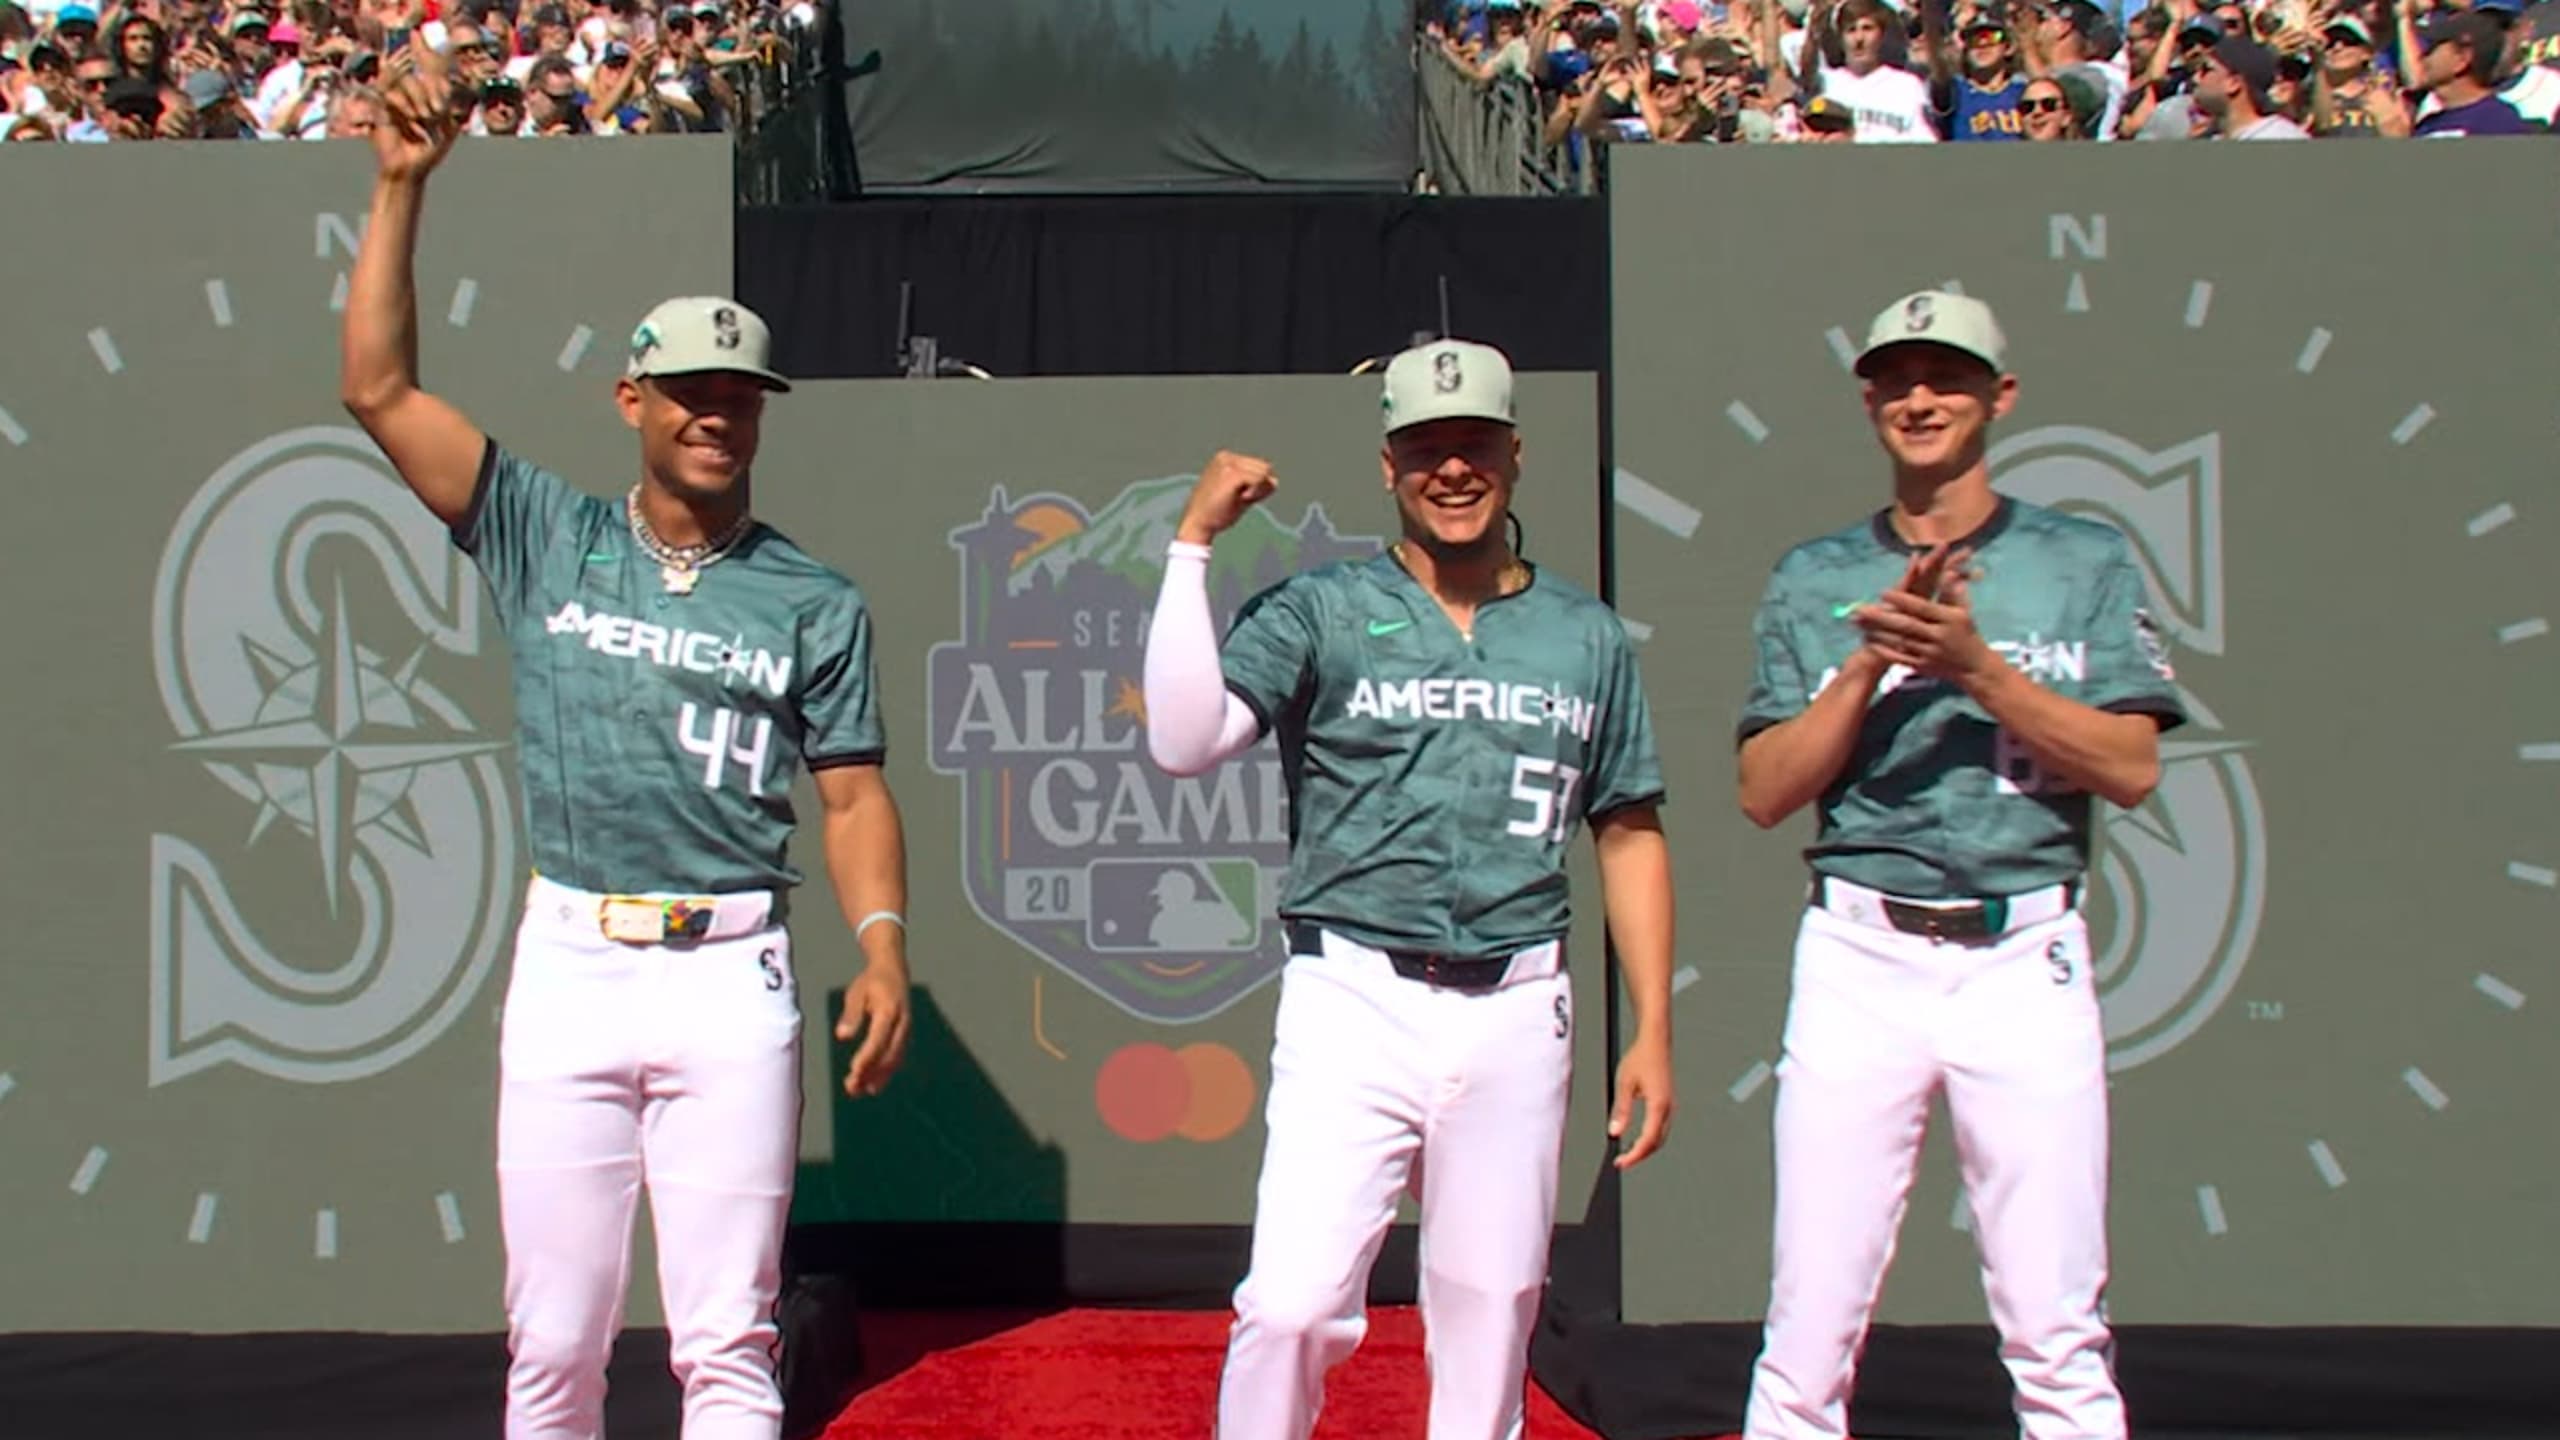 Highlights from MLB All Star Game in Seattle